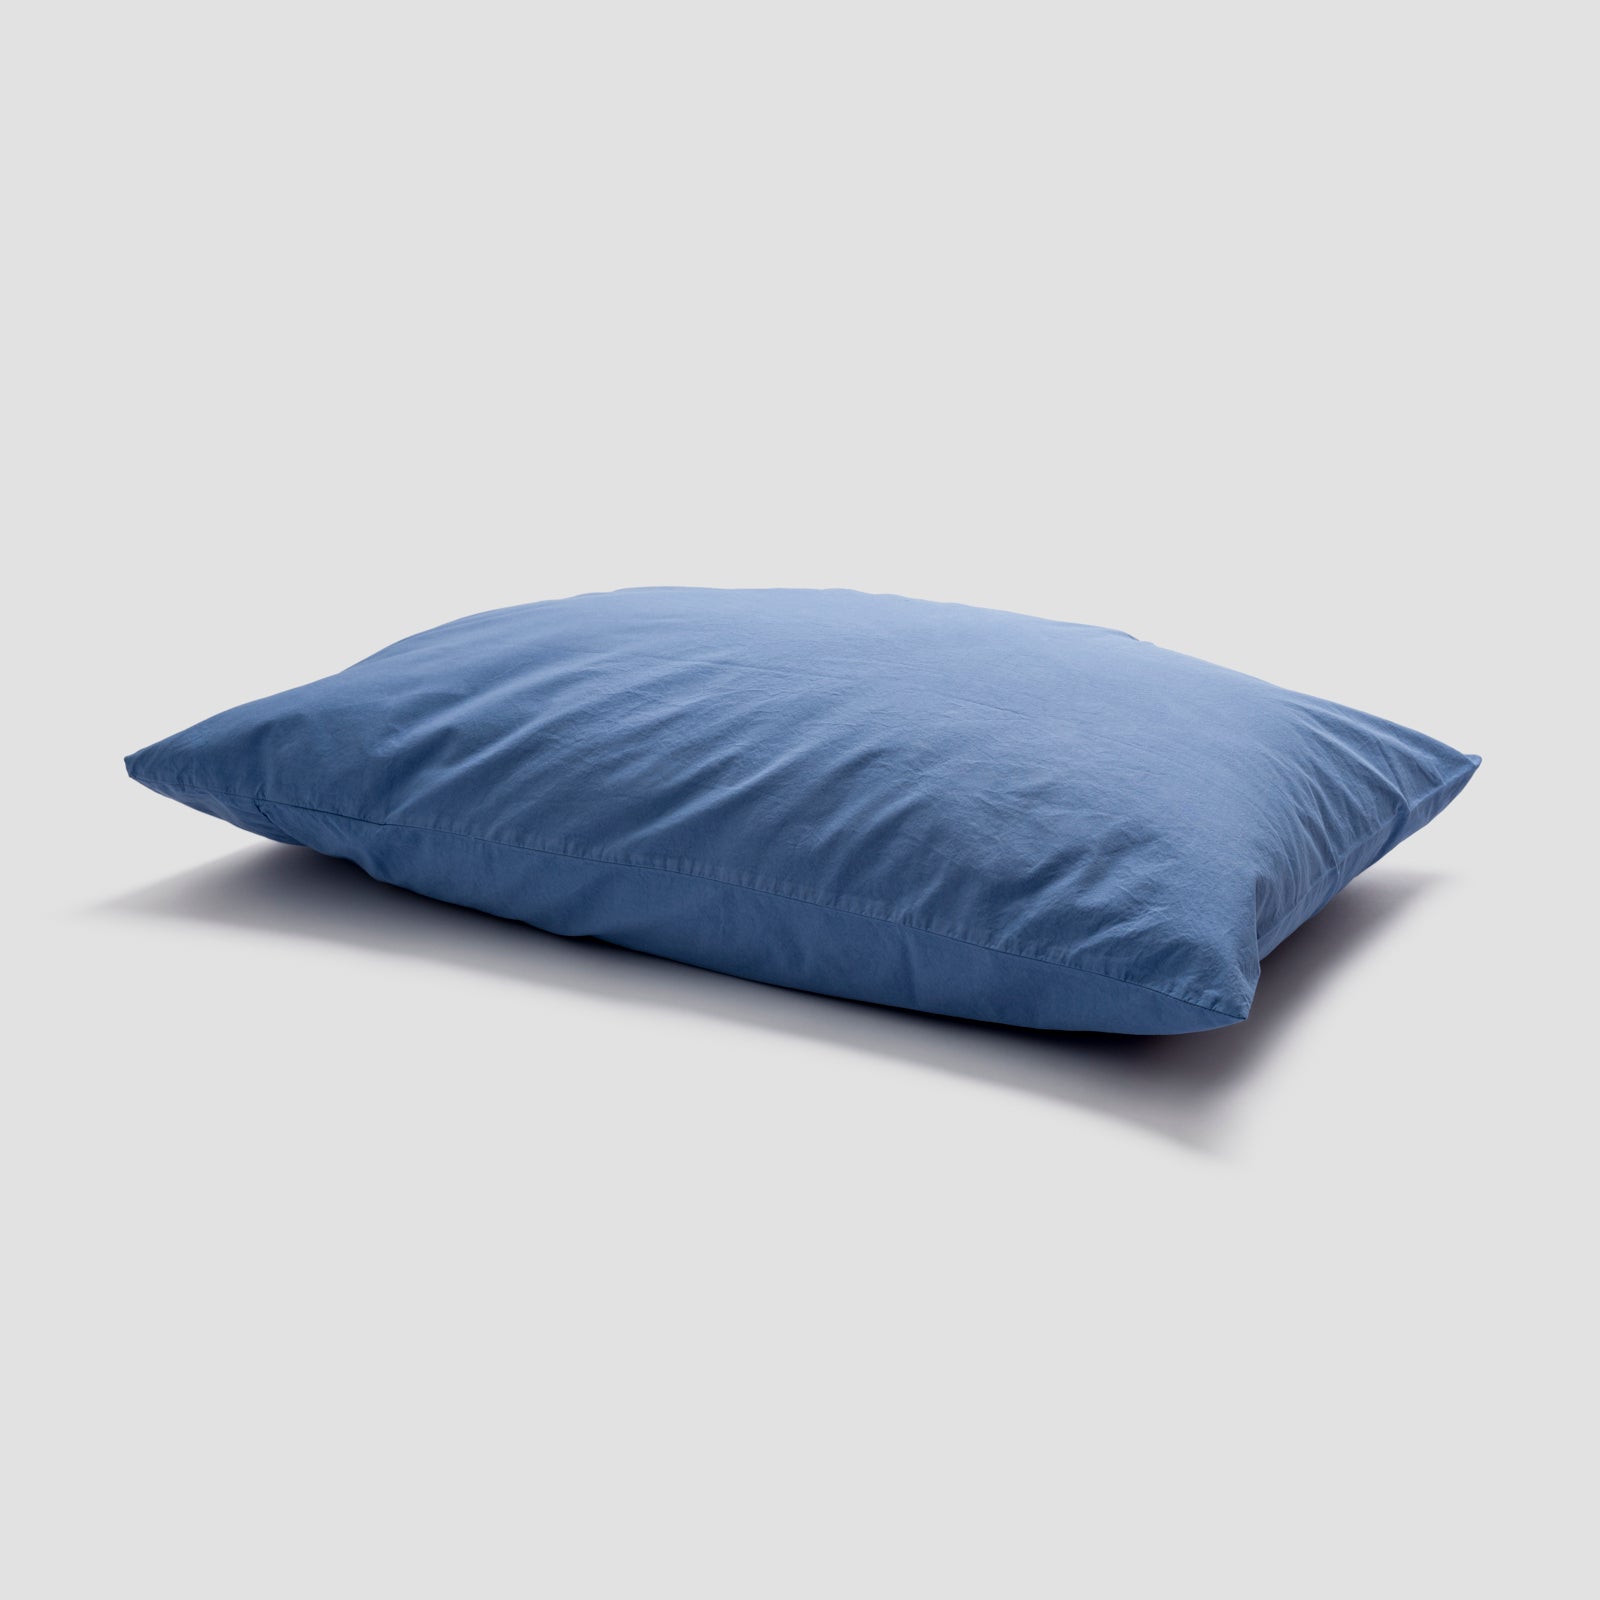 Cove Blue Washed Percale Cotton Pillowcase